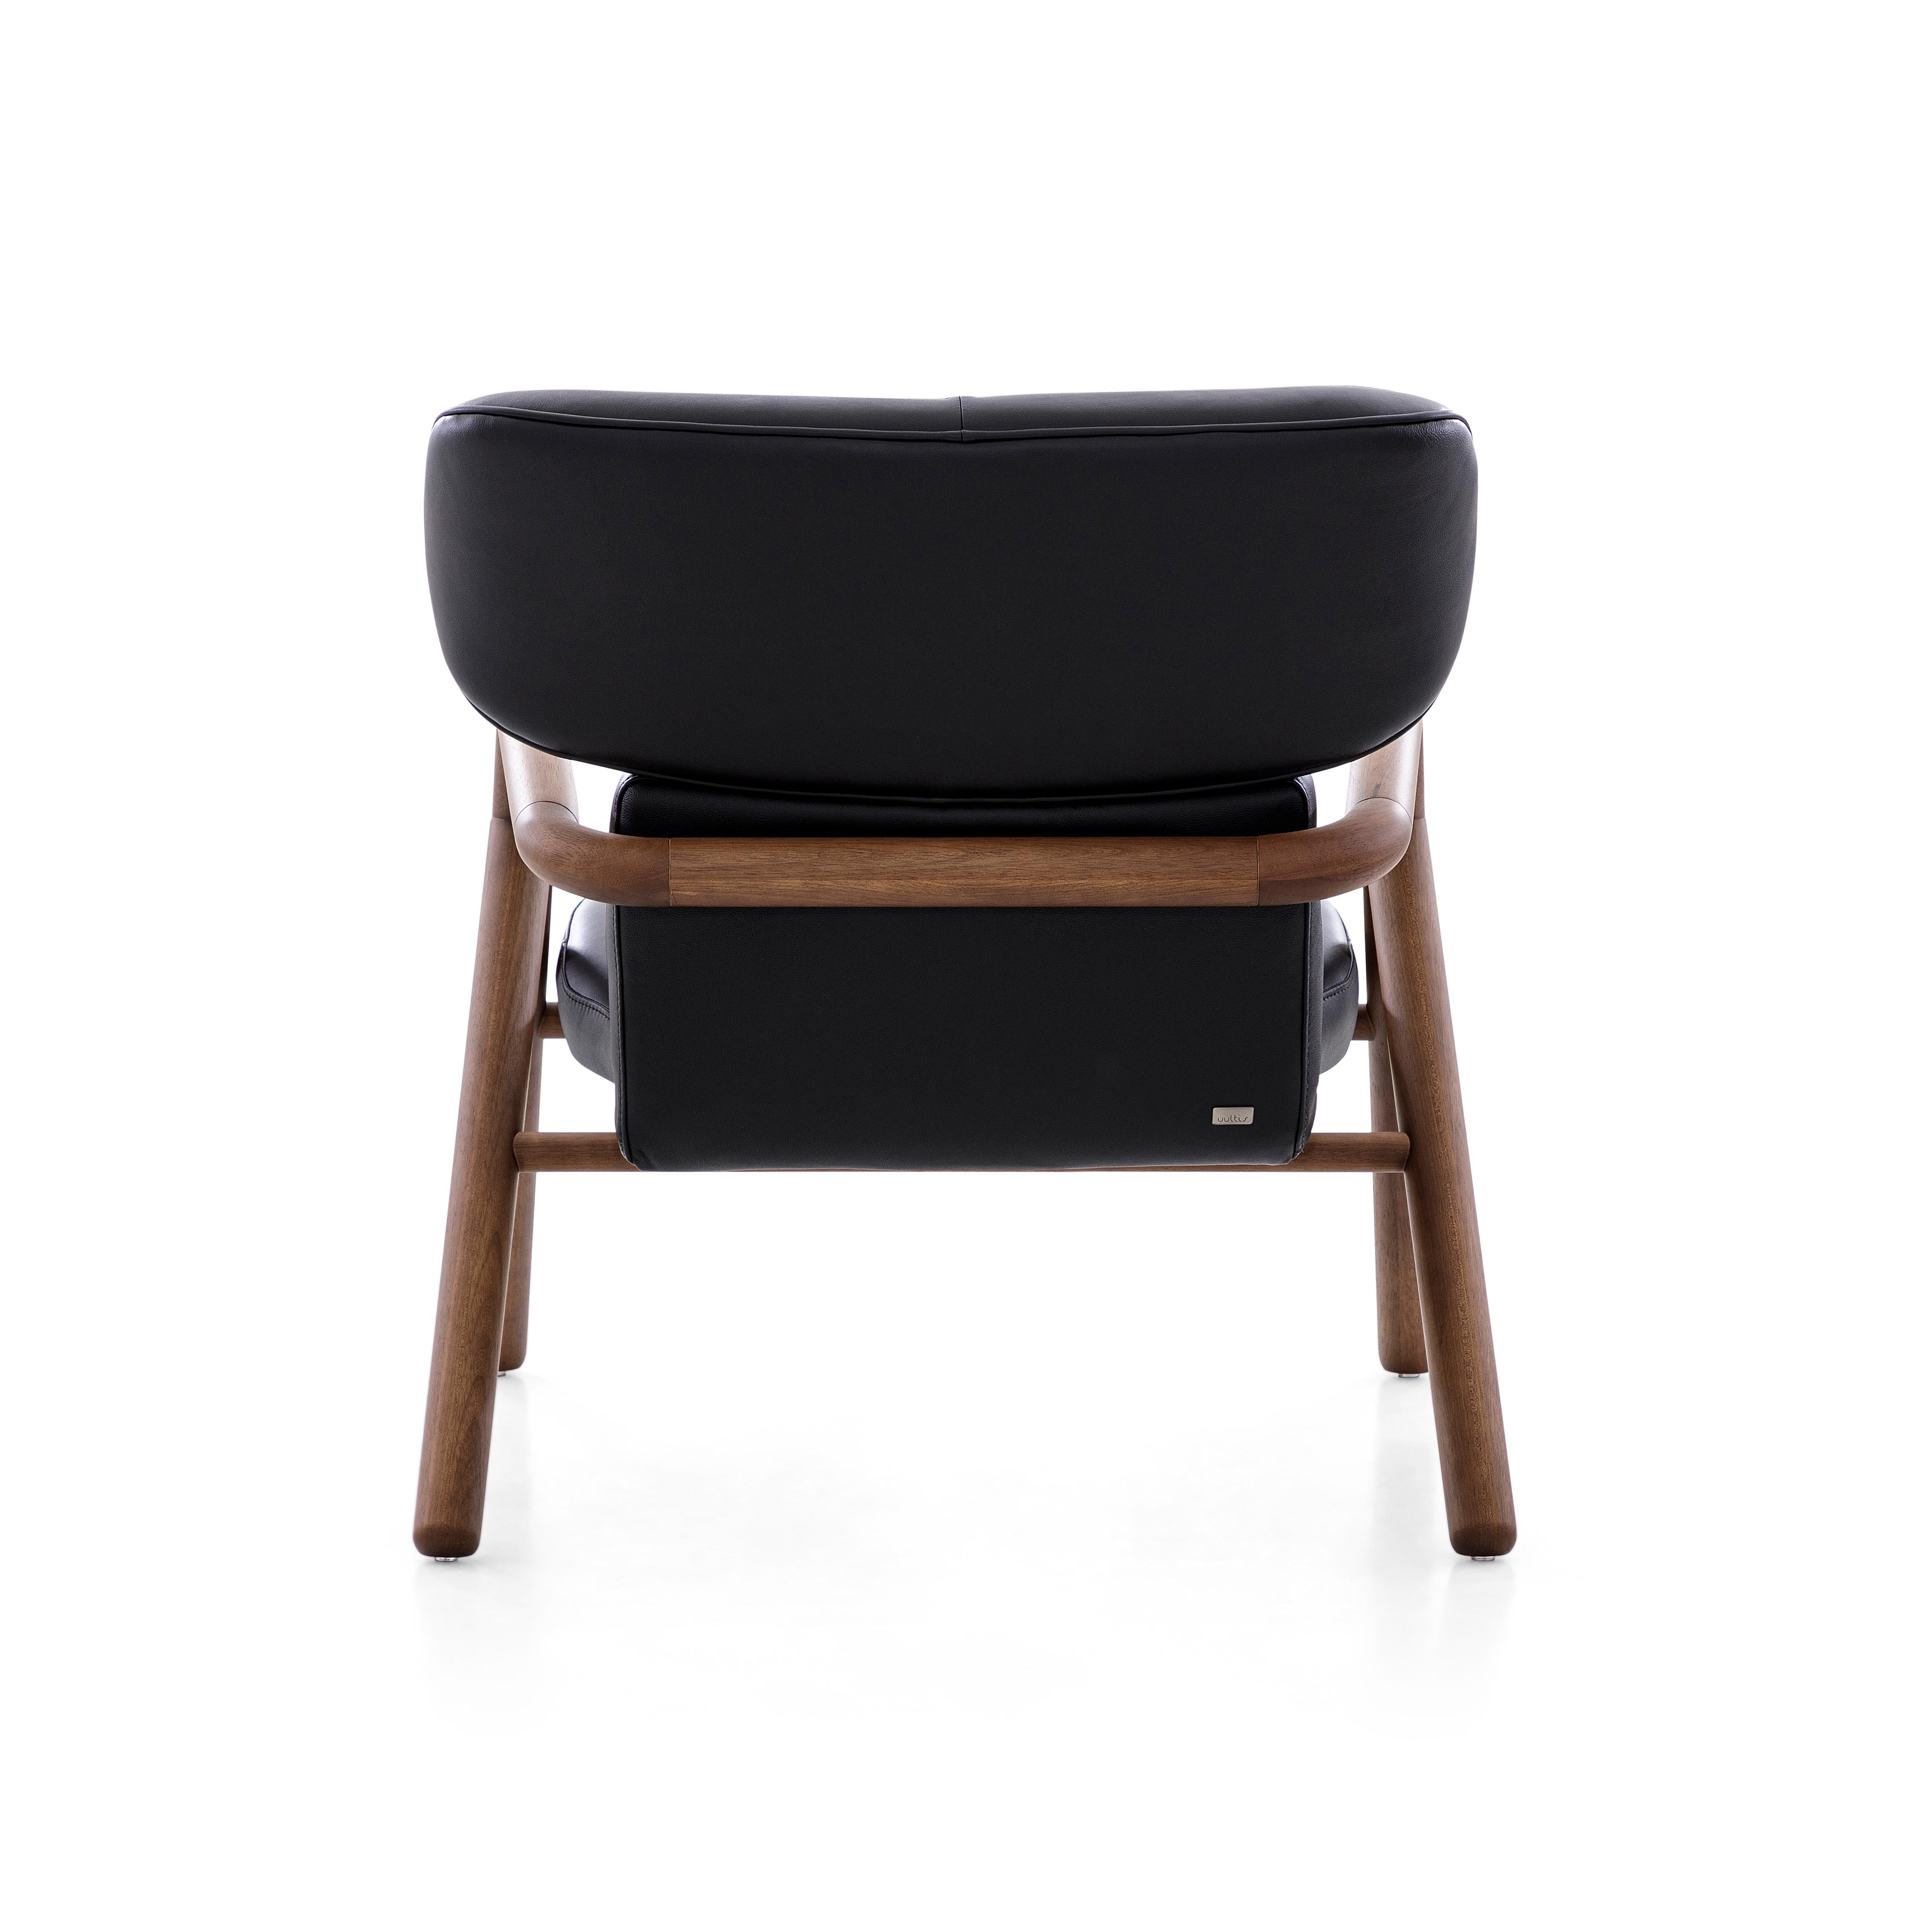 Brazilian Sole Scandinavian-Styled Armchair in Walnut Wood Finish and Black Leather For Sale